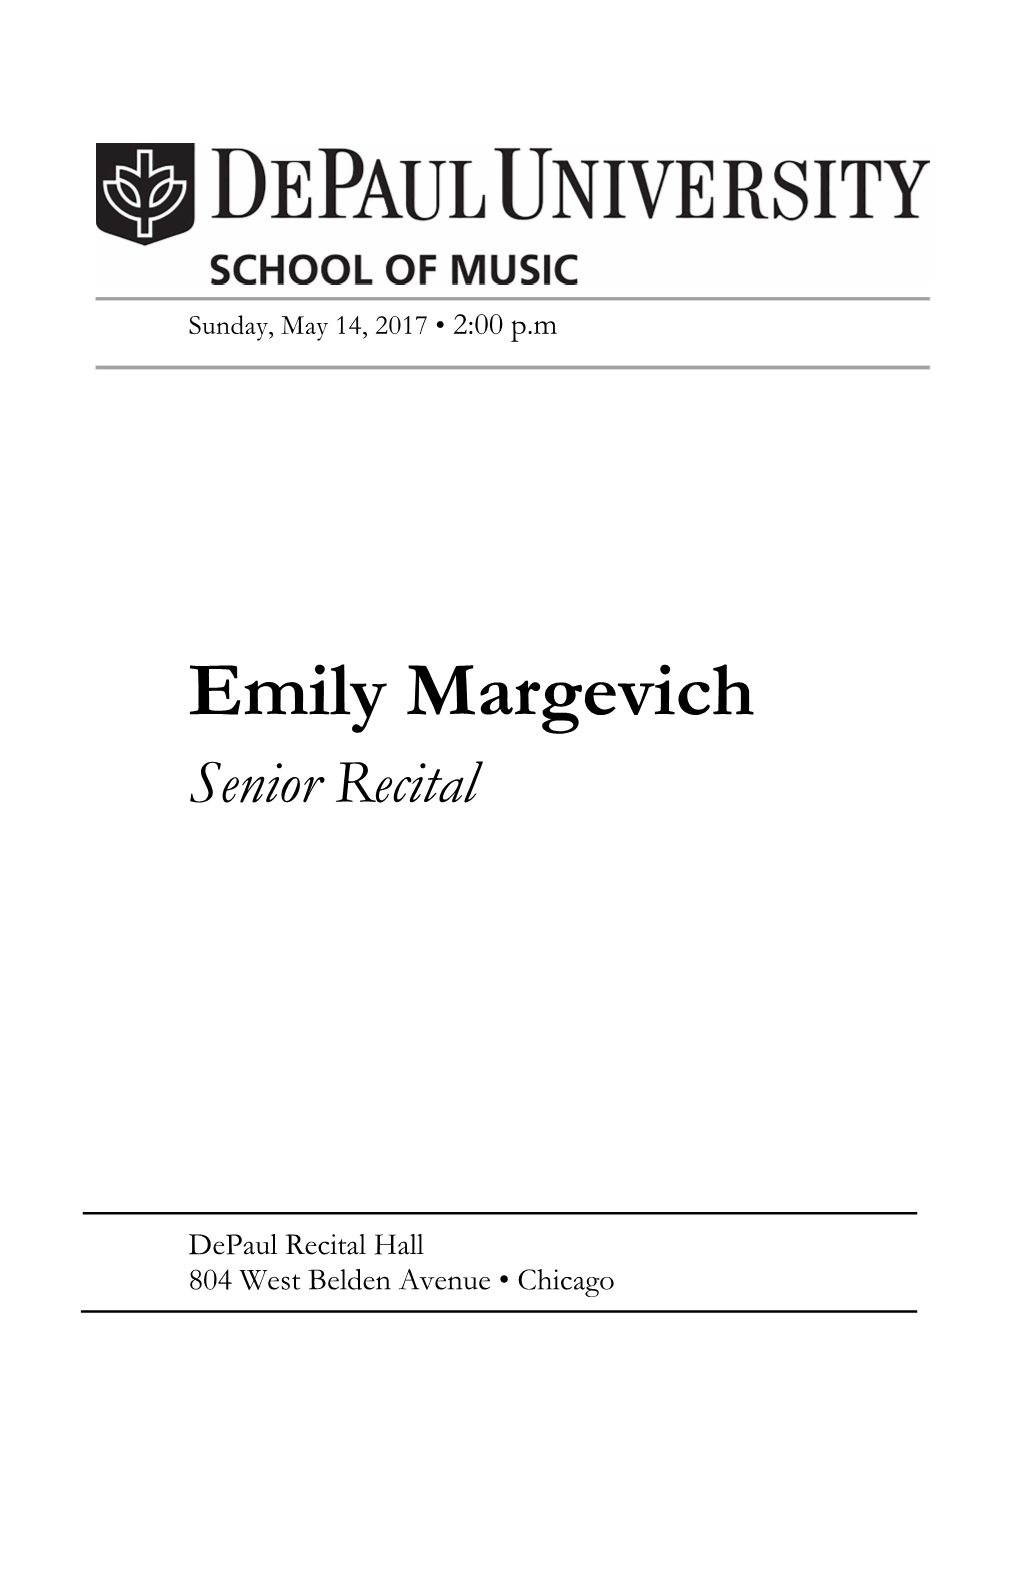 Emily Margevich